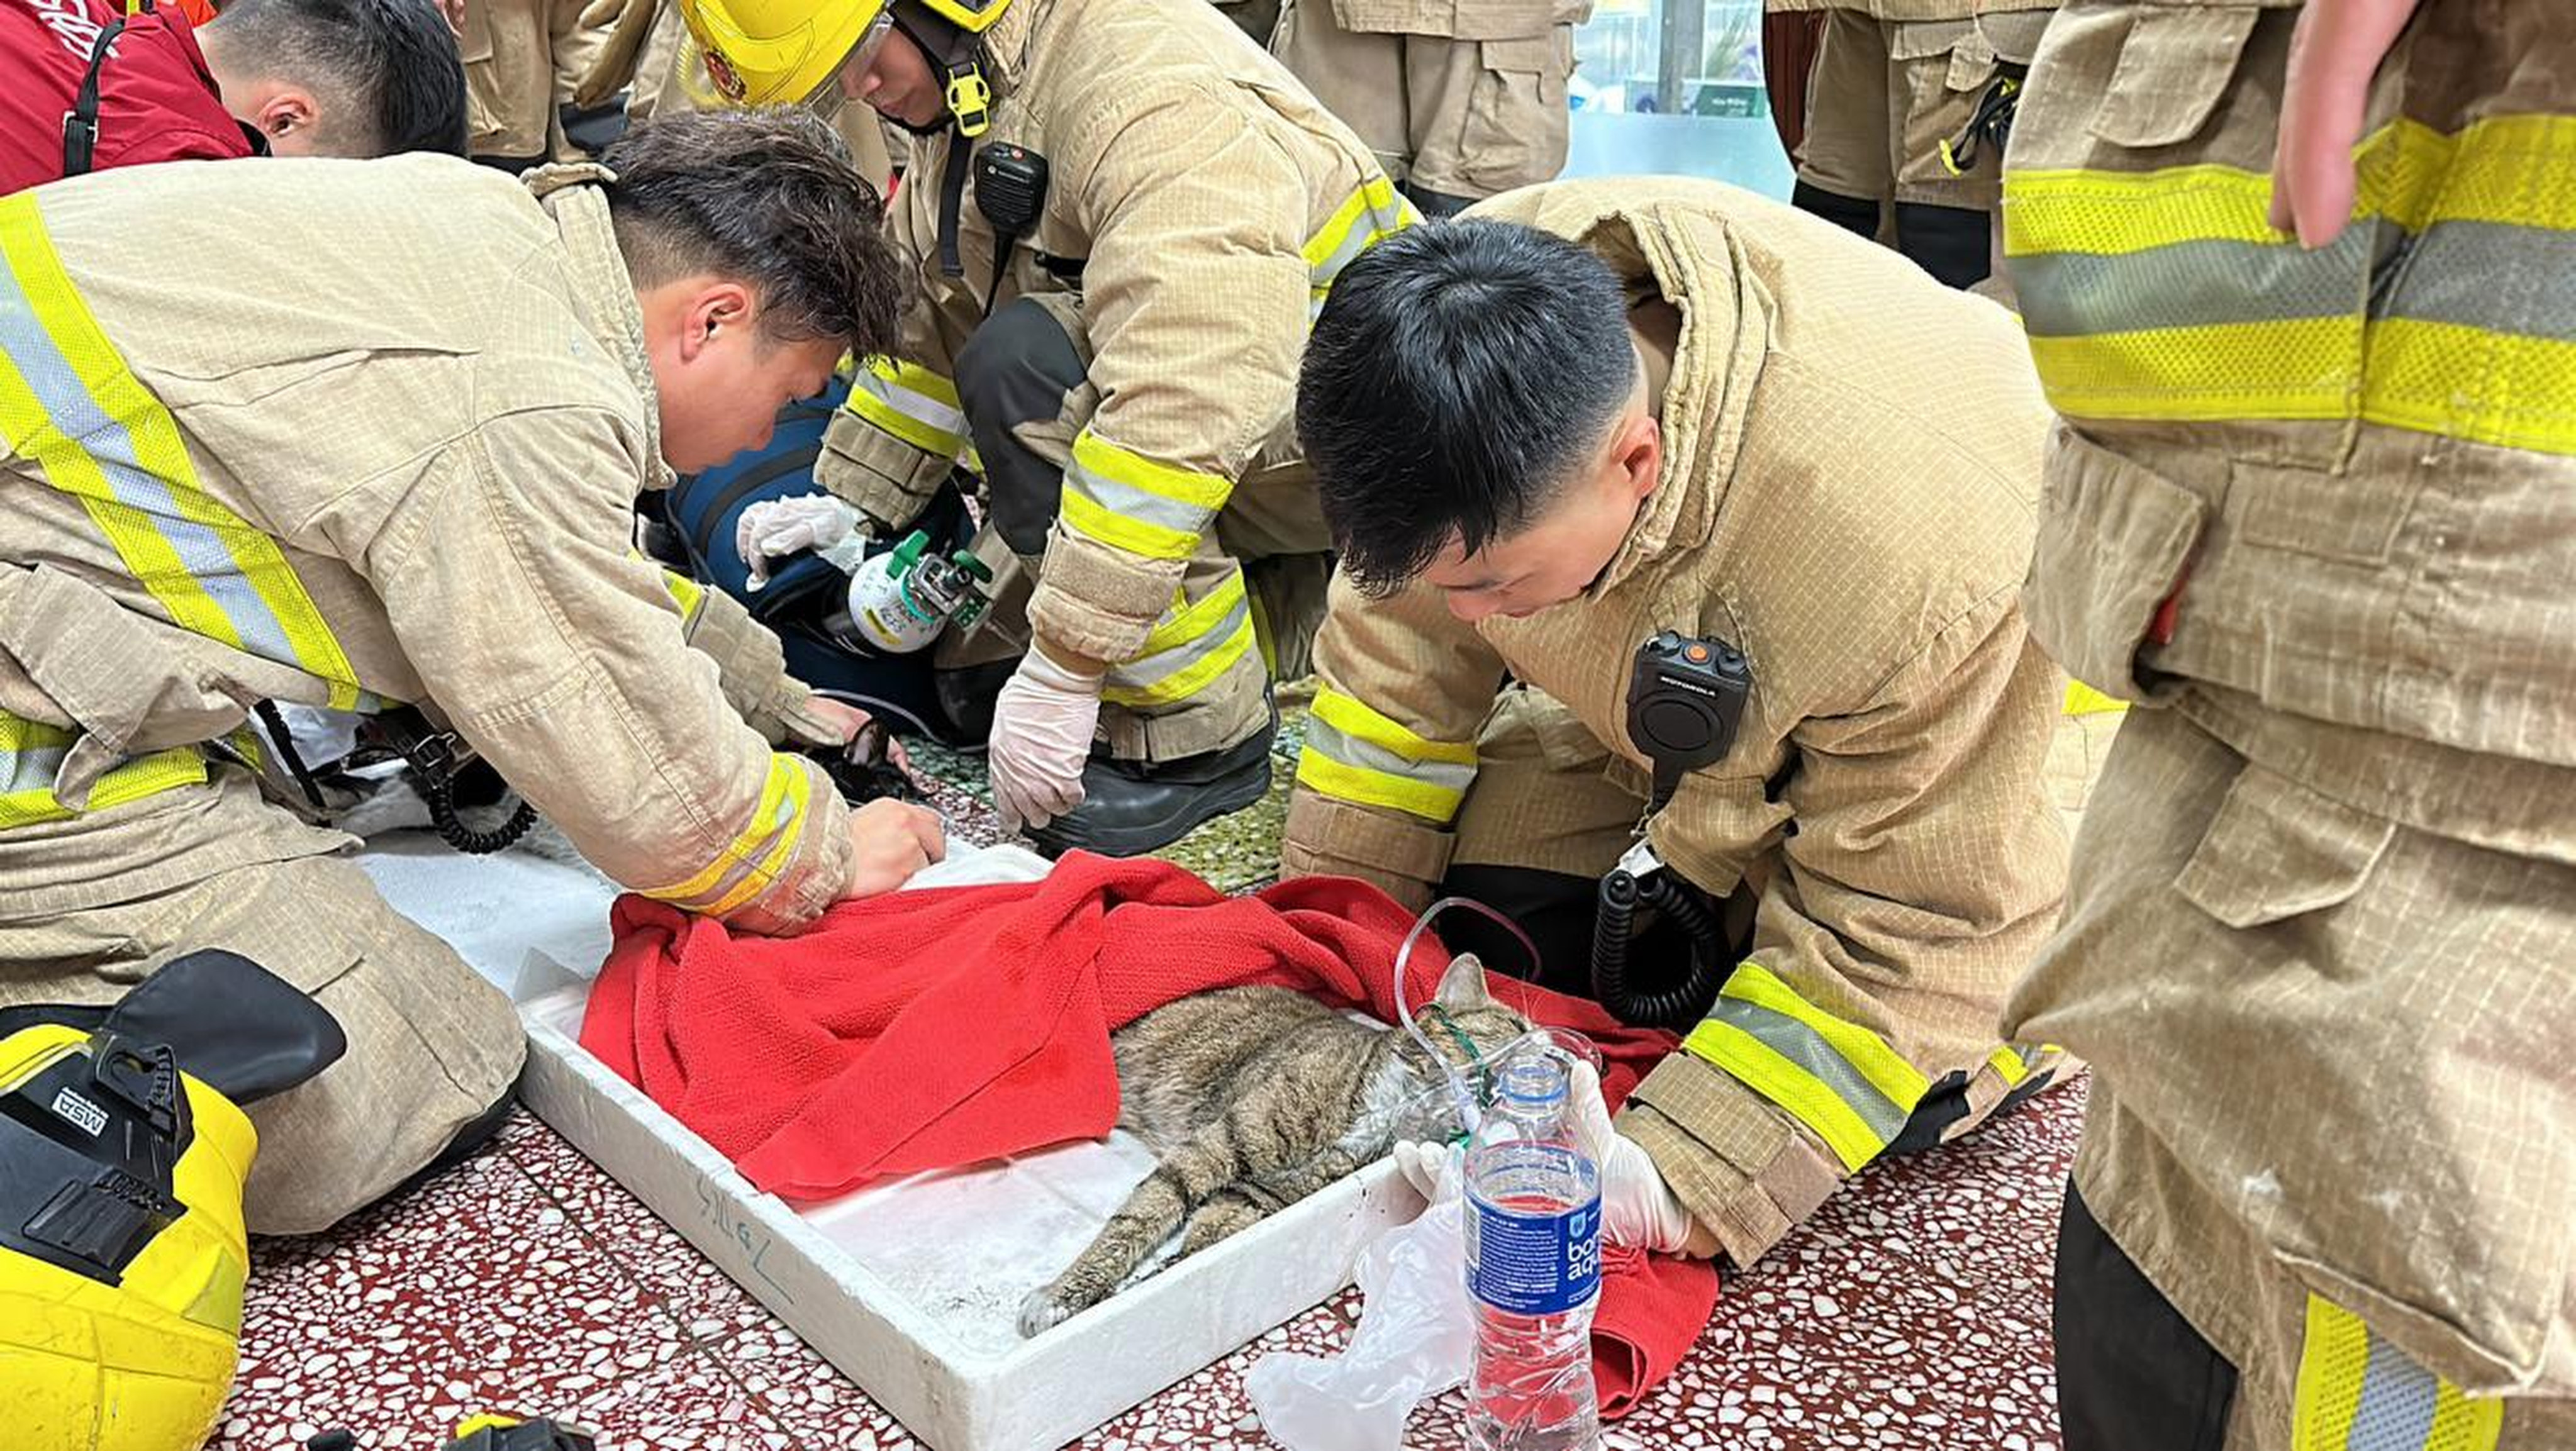 Firefighters use oxygen masked on cats saved from the fire at a flat in Hong Kong. Photo: Facebook/hkanimalpost